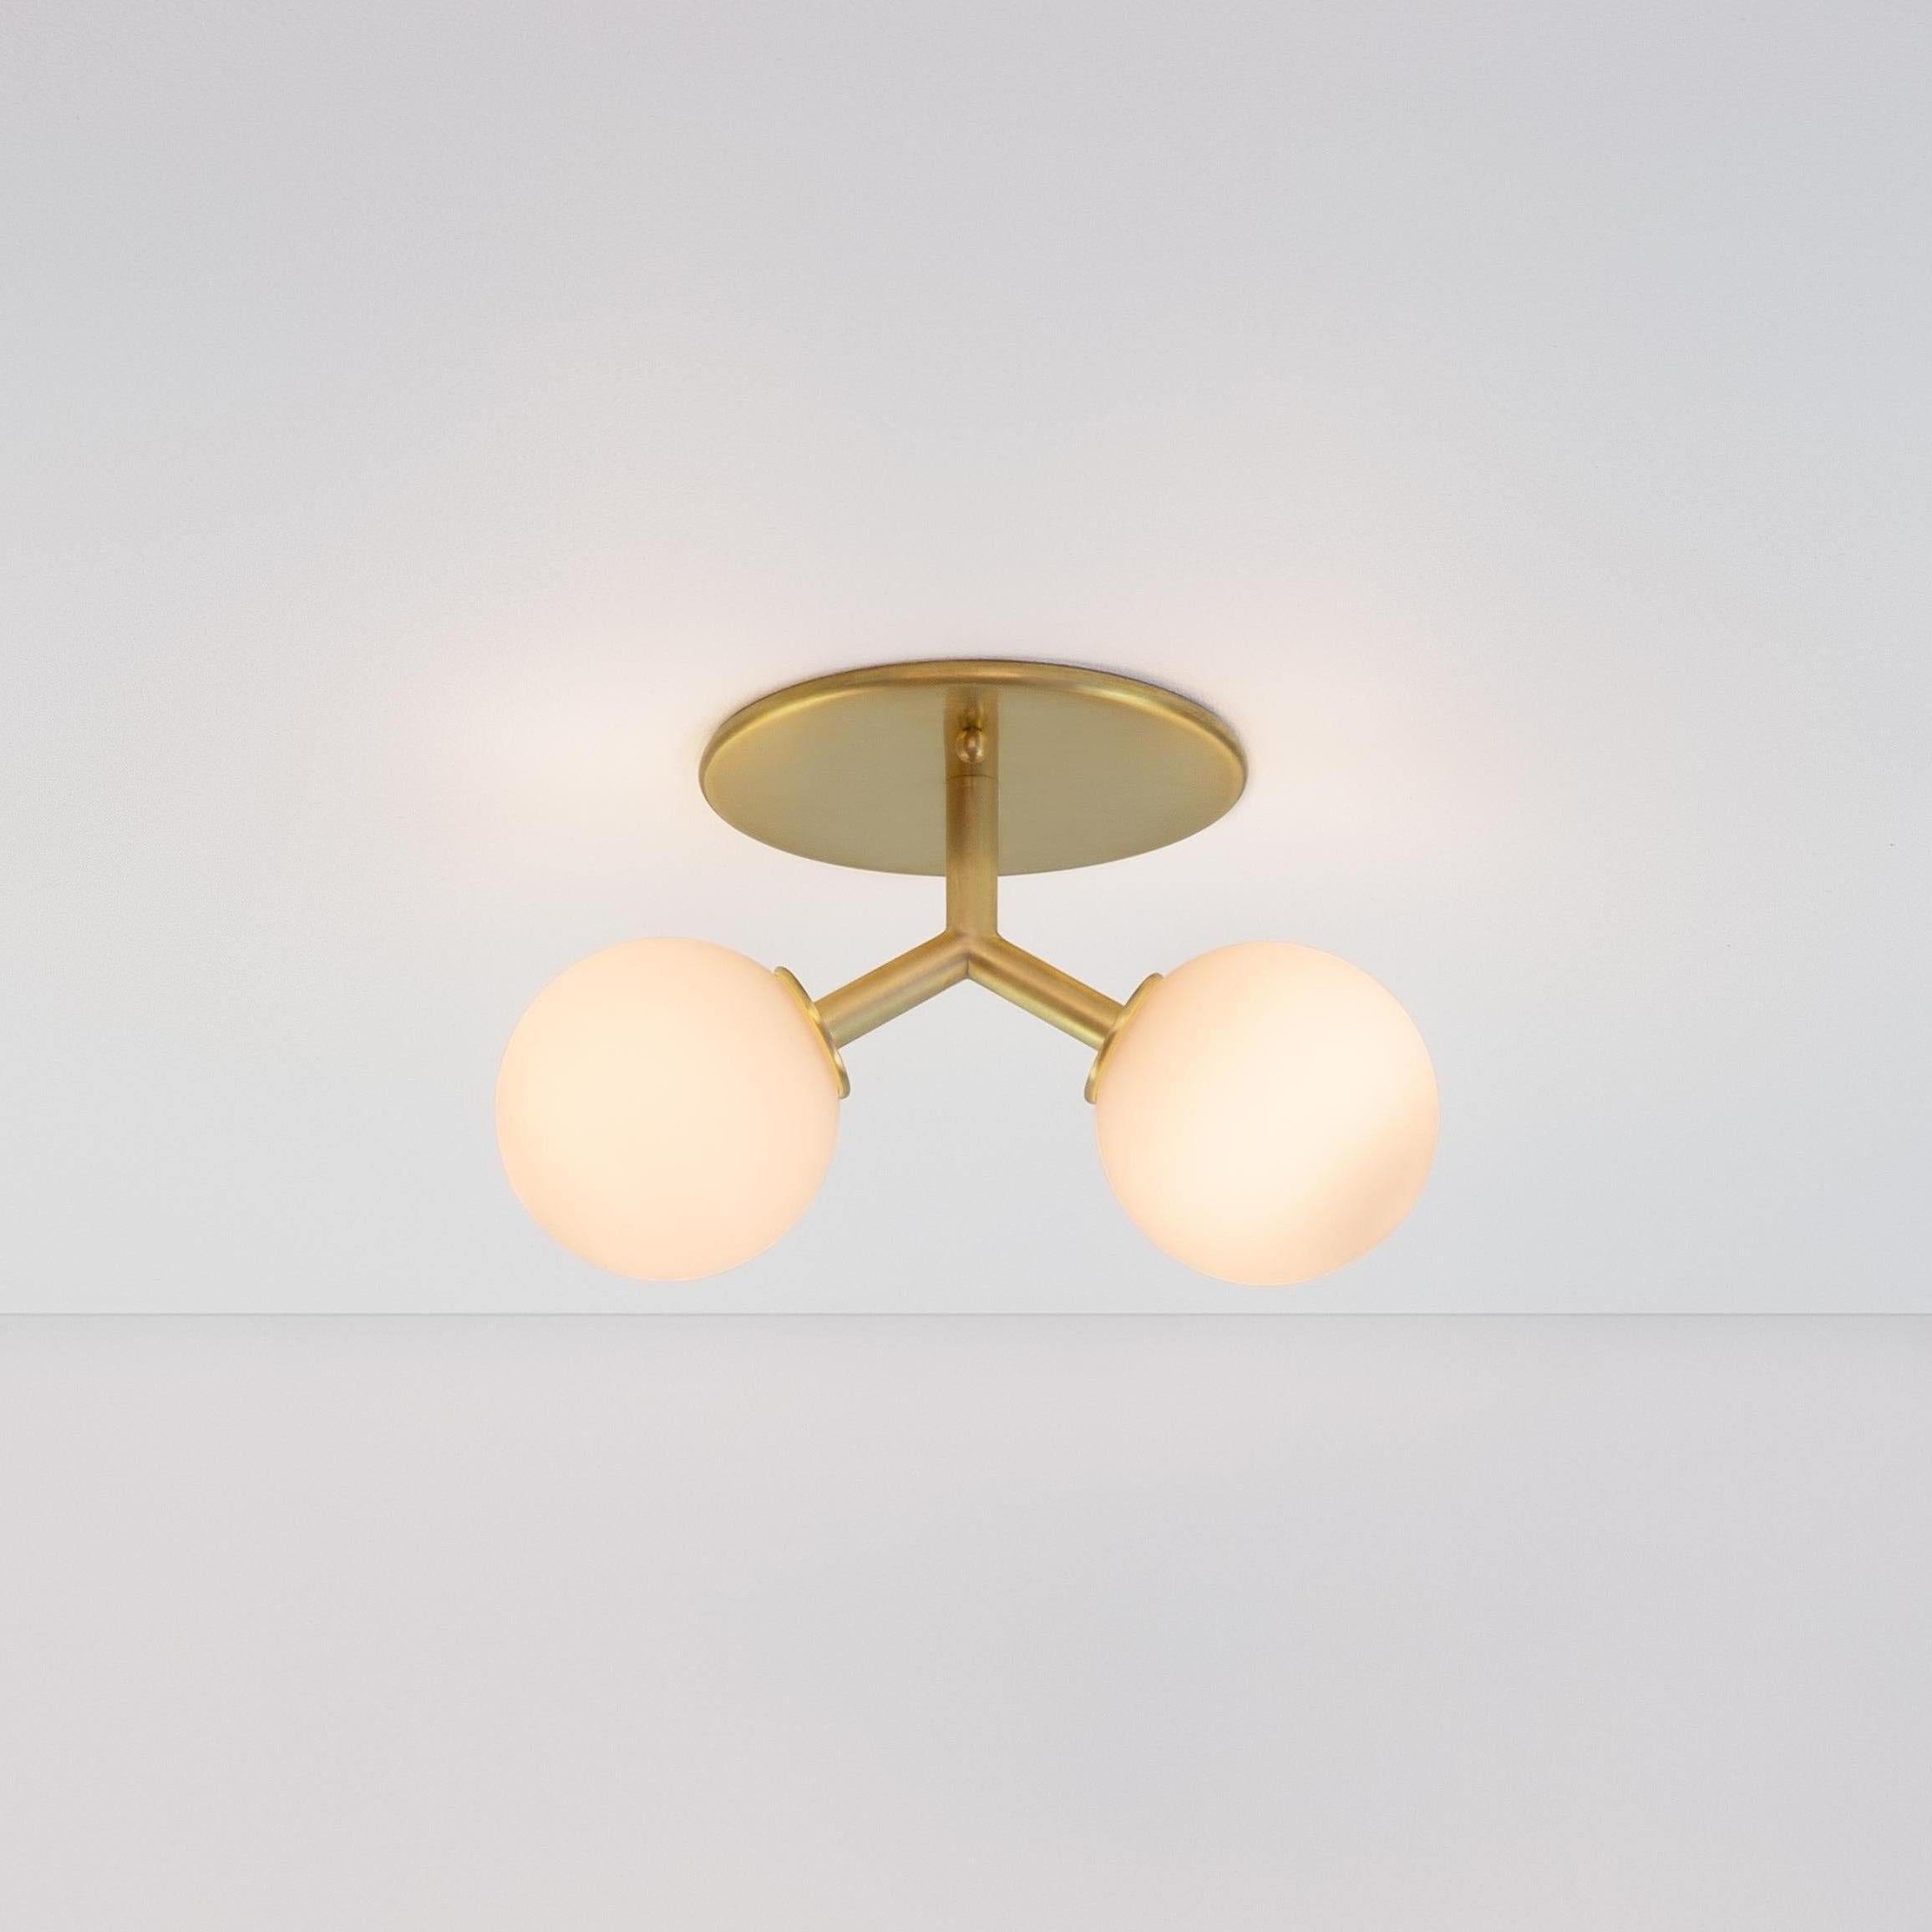 This listing is for 1x Y Flush Mount in Brass designed and manufactured by Research Lighting.

Materials: Brass & Glass
Finish: Raw Brushed Brass 
Electronics: 1x G9 Socket, 2x 2.5 Watt LED Bulbs (included), 500 Lumens total
UL Listed. Made in the